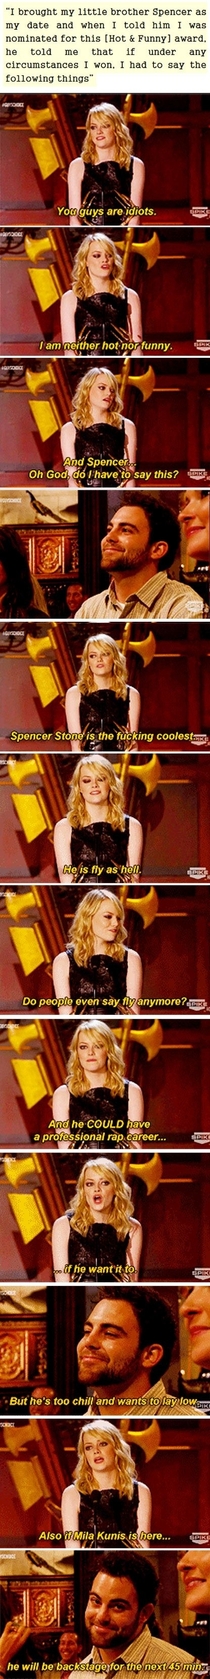 Emma Stone is by far the best sister ever